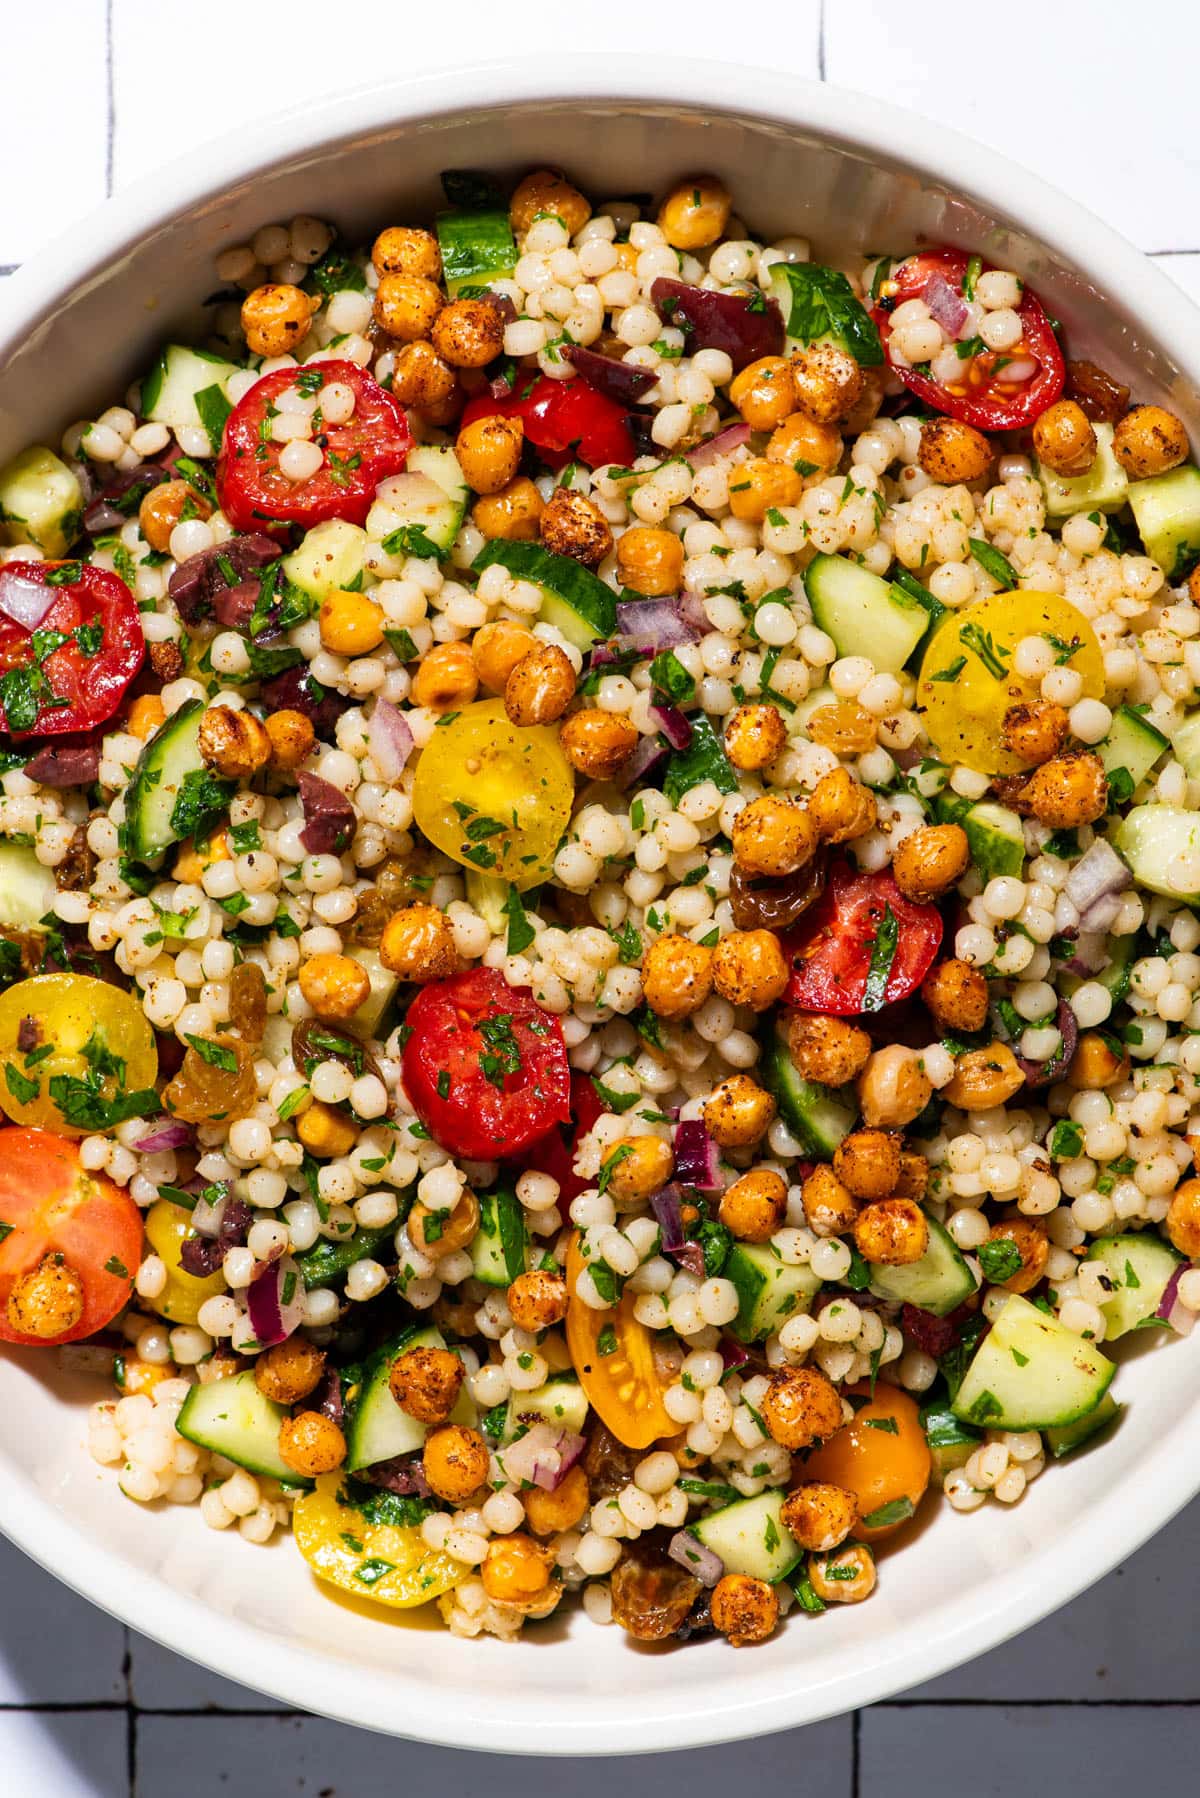 Vegan pearl couscous salad with chickpeas and raisins.